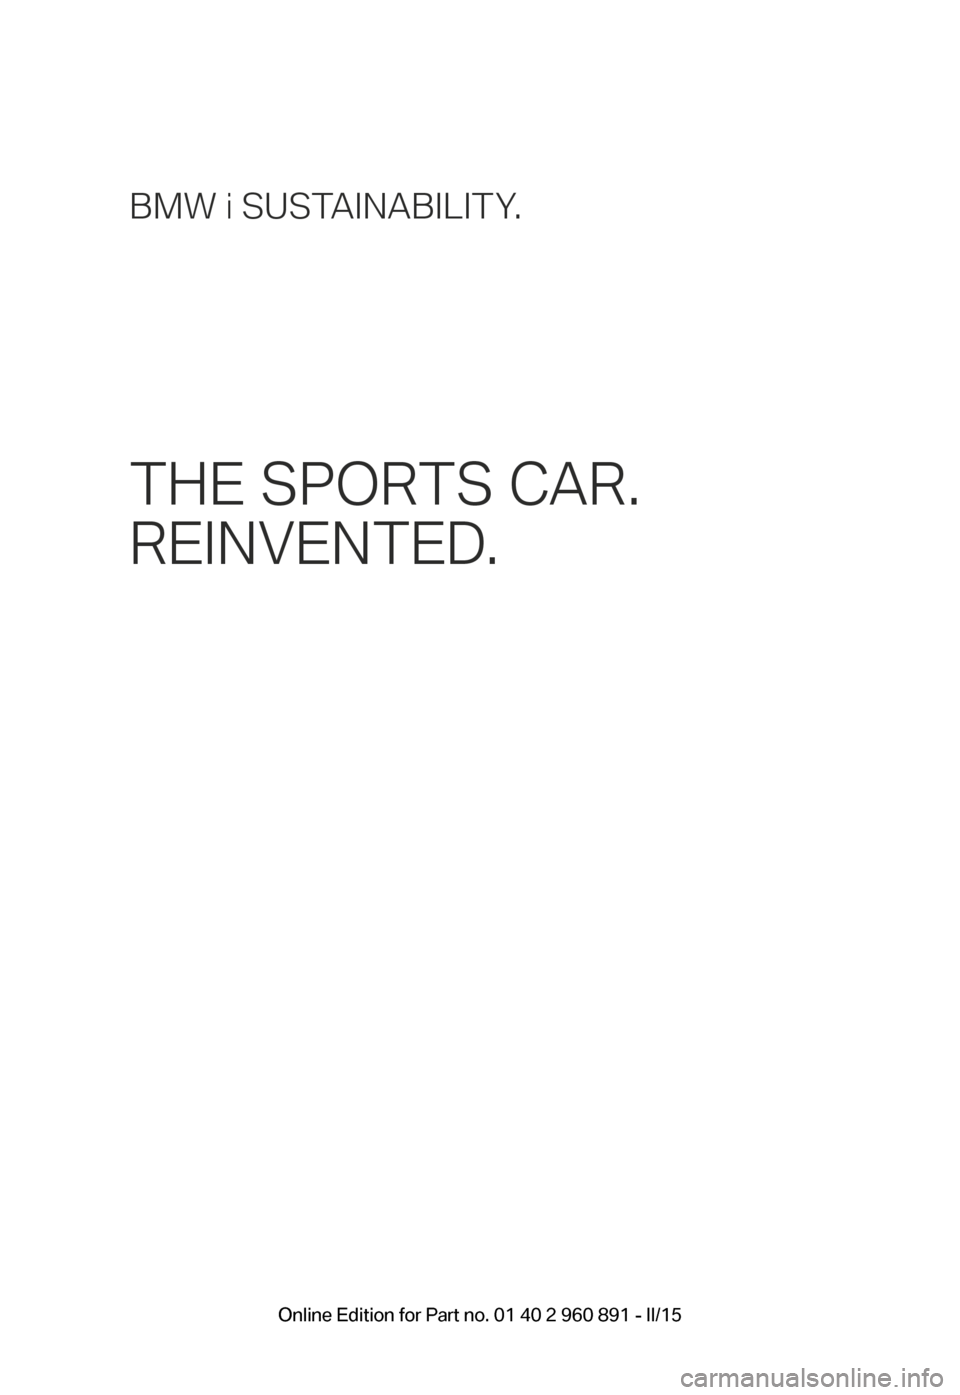 BMW I8 2015 I12 Owners Manual BMW i SUSTAINABILITY.
THE SPORTS CAR. 
REINVENTED.
BMW_i8_Bedienungseinleger_210x138mm_US.indd   115.01.14   17:53 Online Edition for Part no. 01 40 2 960 891 - II/15 